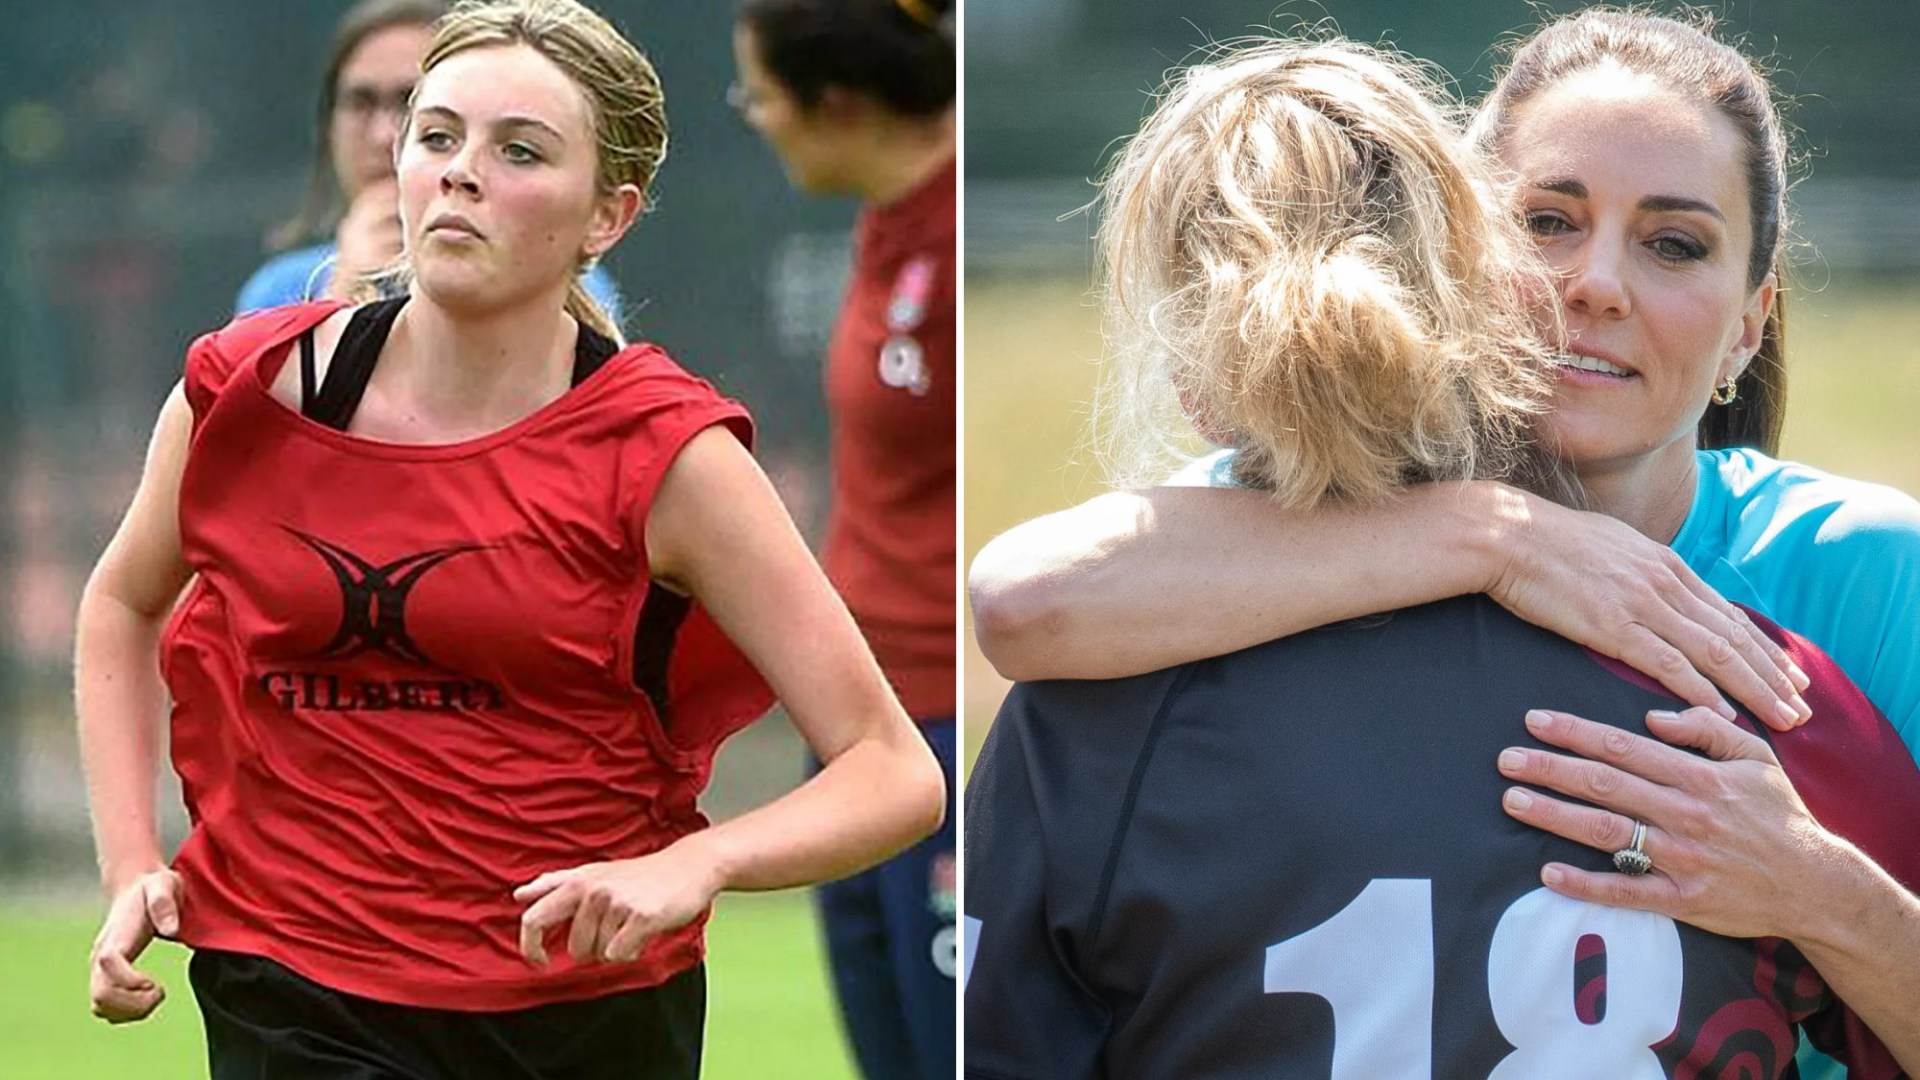 17-Year-Old Rugby Star Found Hanged, Mother Gifts Kate Middleton